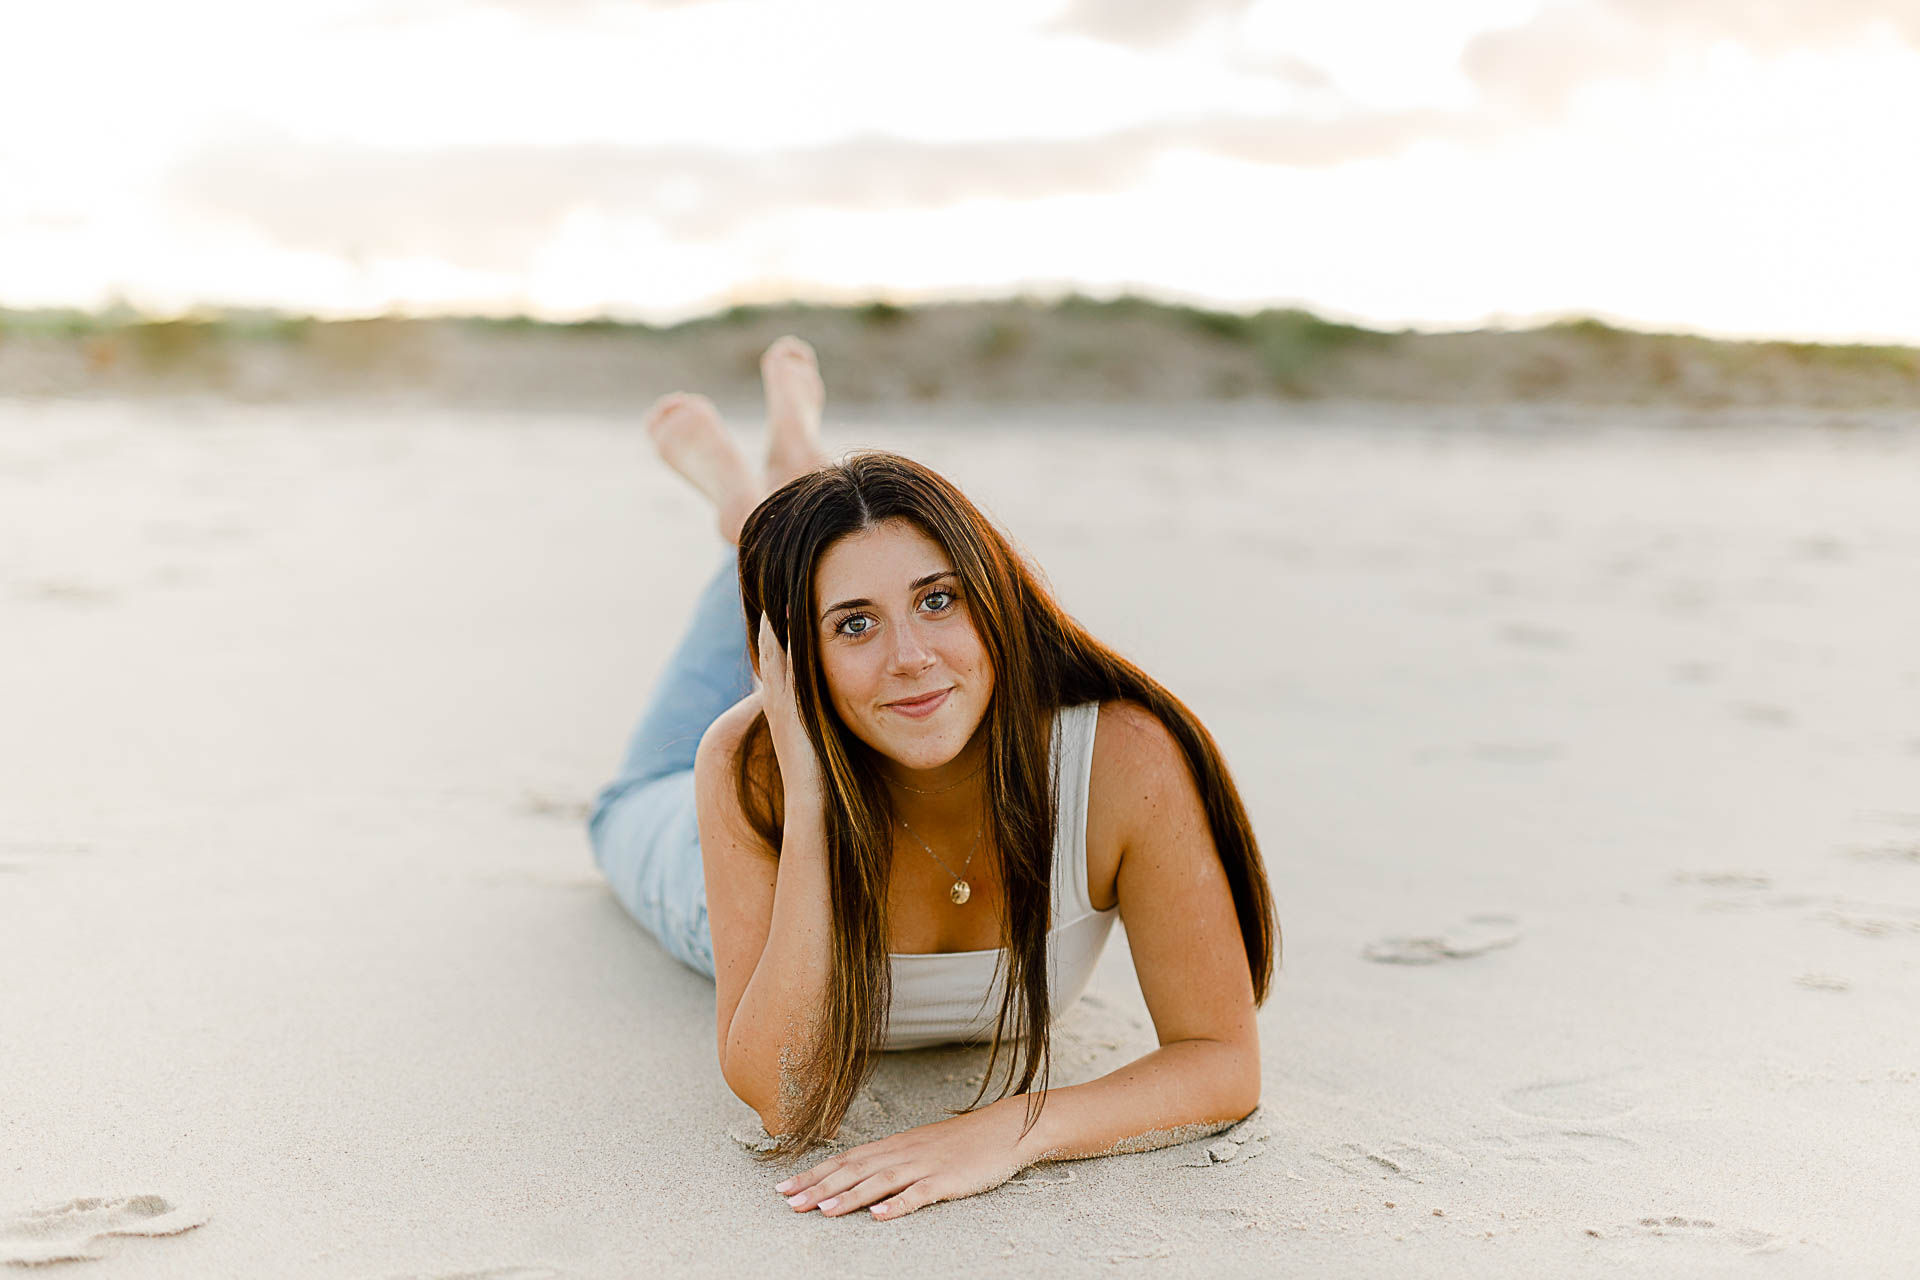 Photo by Scituate Senior Portrait Photographer Christina Runnals | High school girl laying on the beach